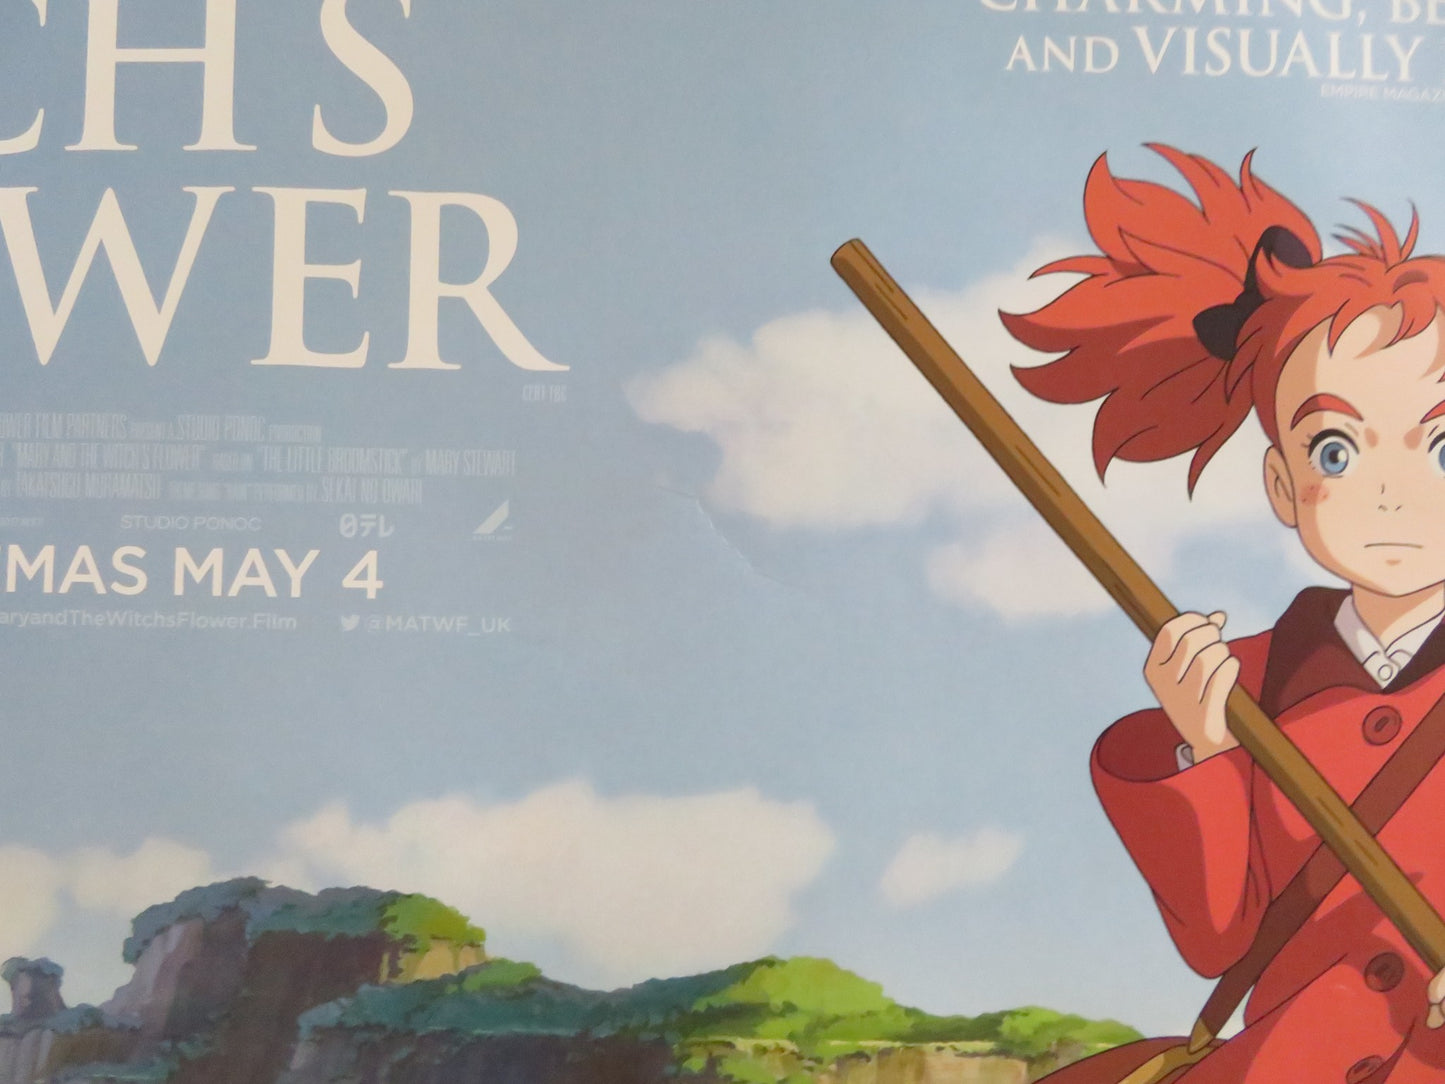 MARY AND THE WITCH'S FLOWER UK QUAD (30"x 40") ROLLED POSTER HANA SUGISASKI 2017